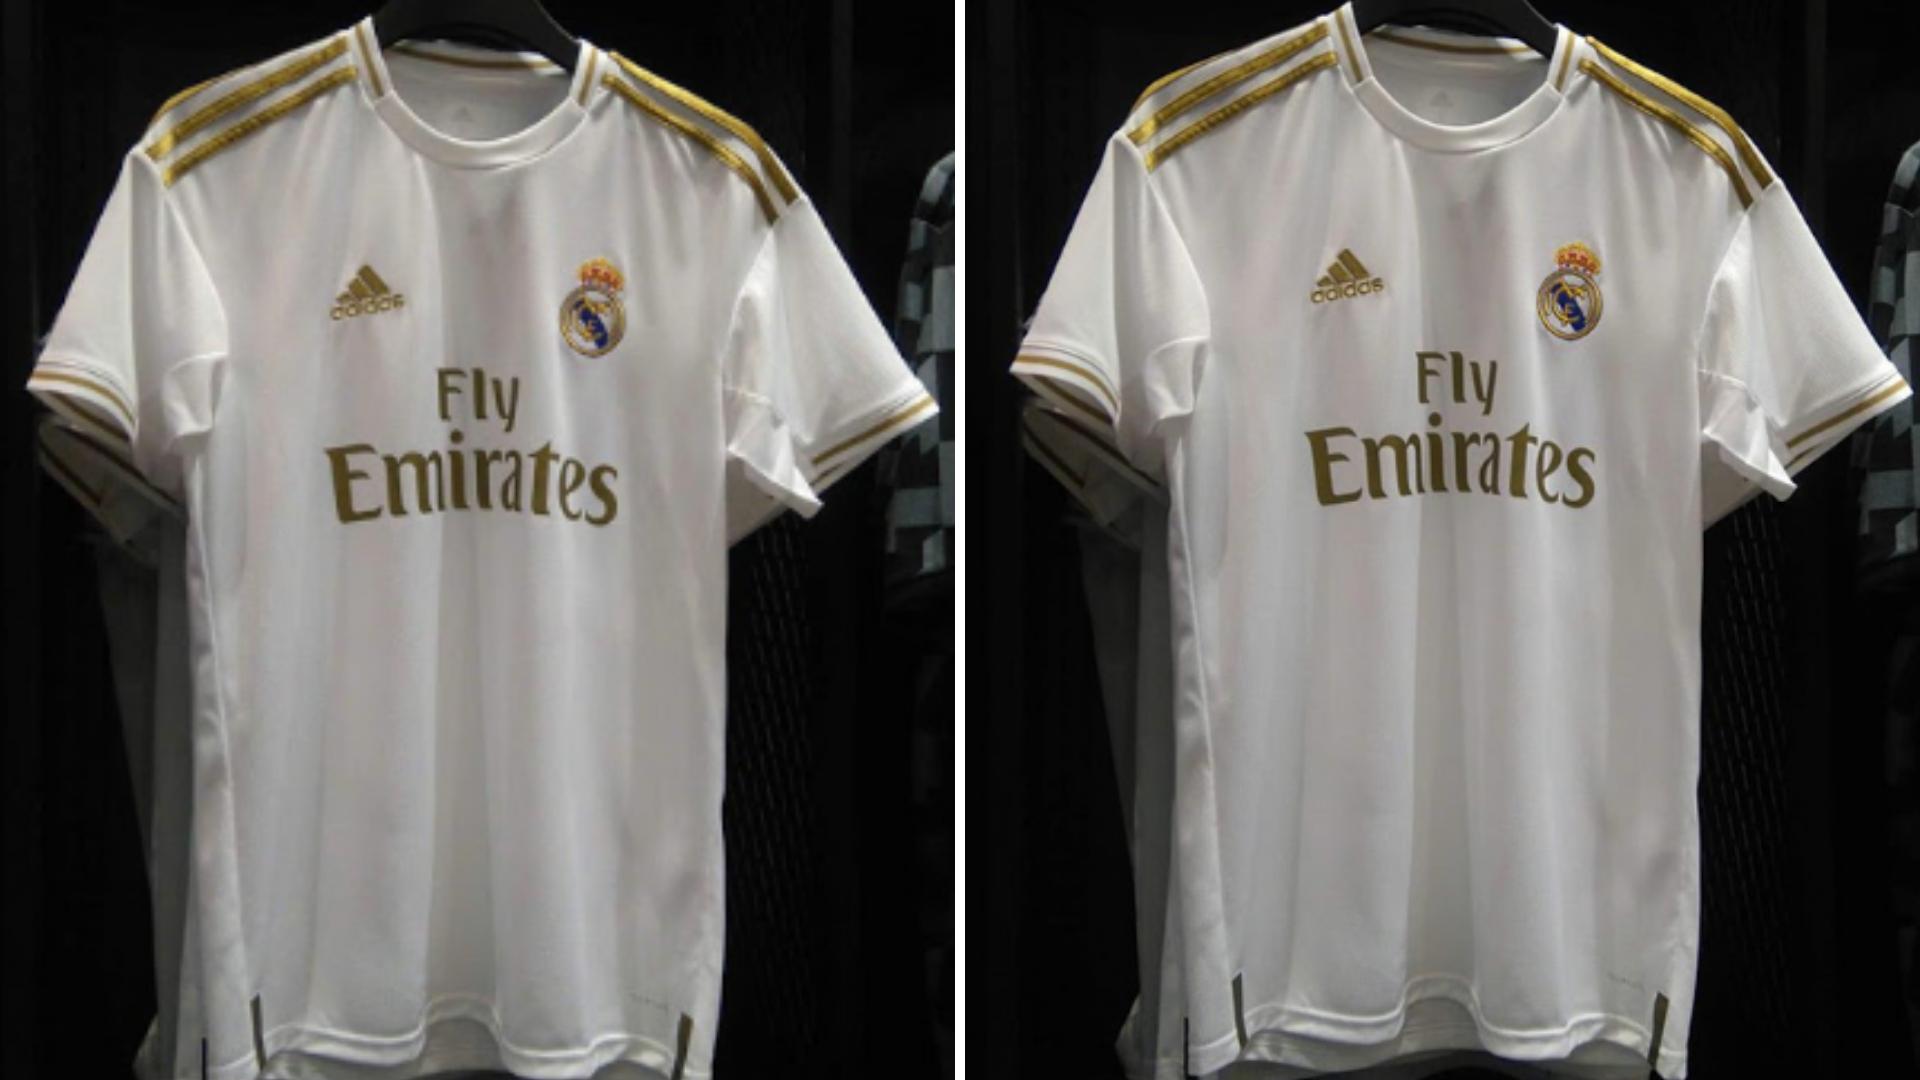 Real Madrid's Home Kit For The 2019 20 Season Has Leaked Online